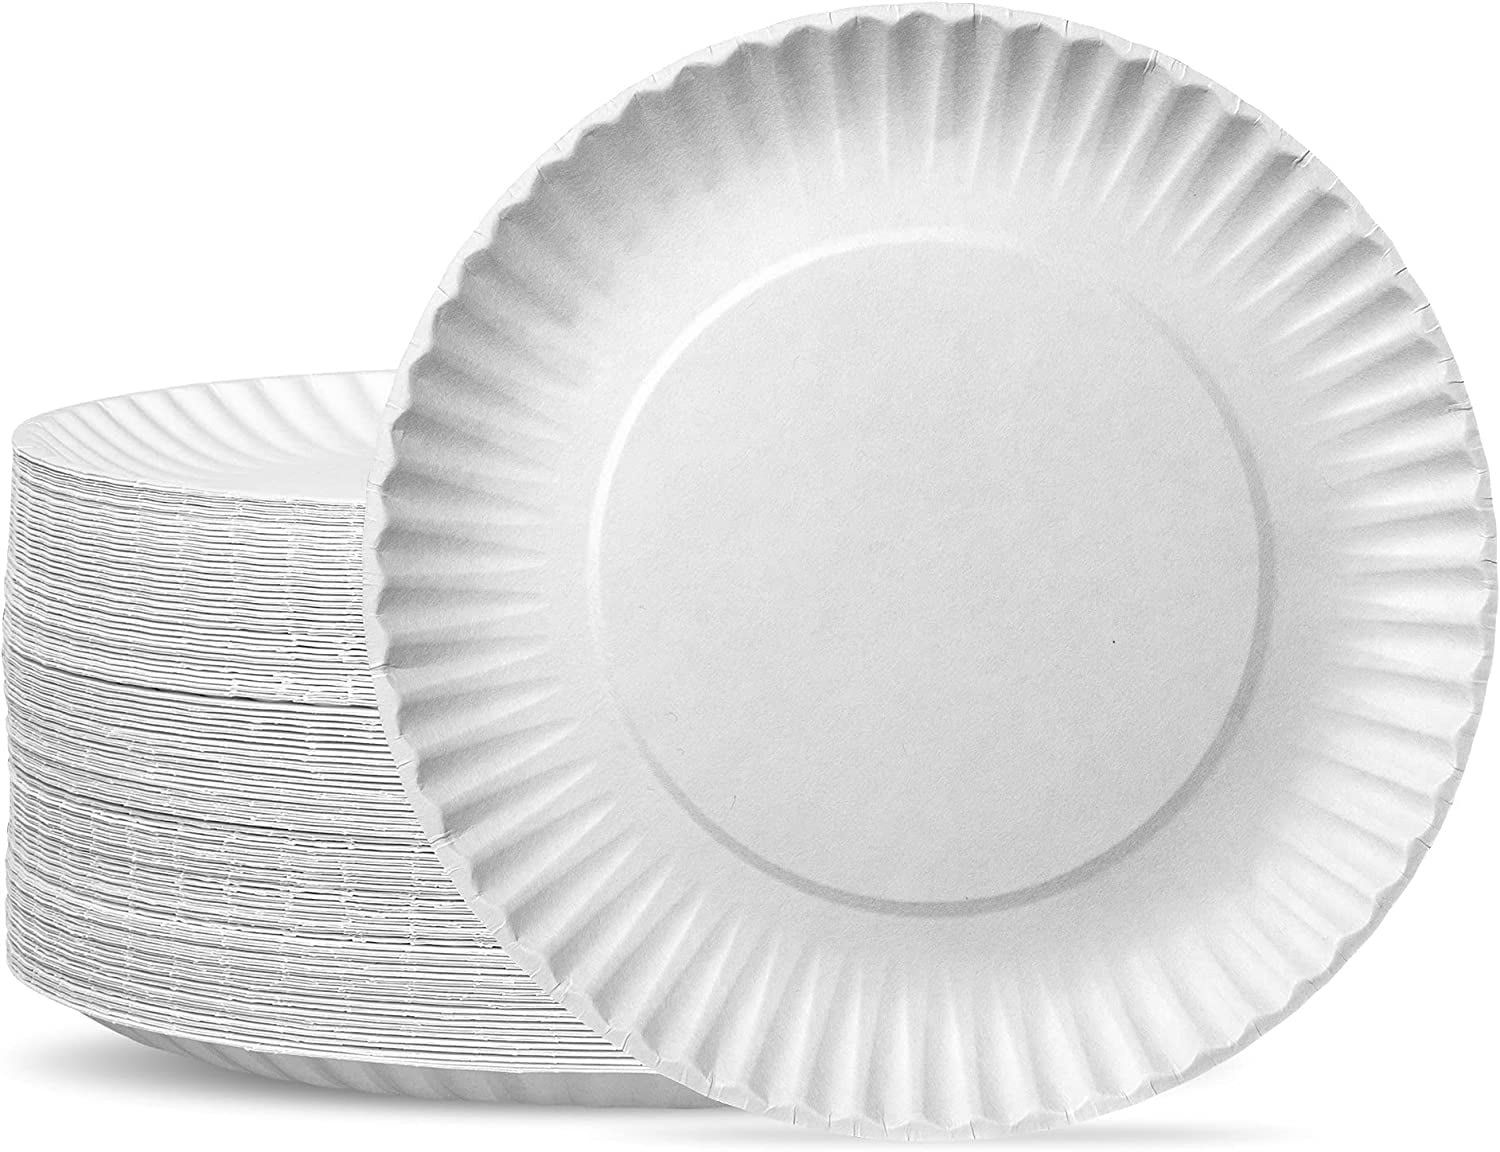 Basics Everyday Paper Plates, 8 5/8 inch, Disposable, 300 Count